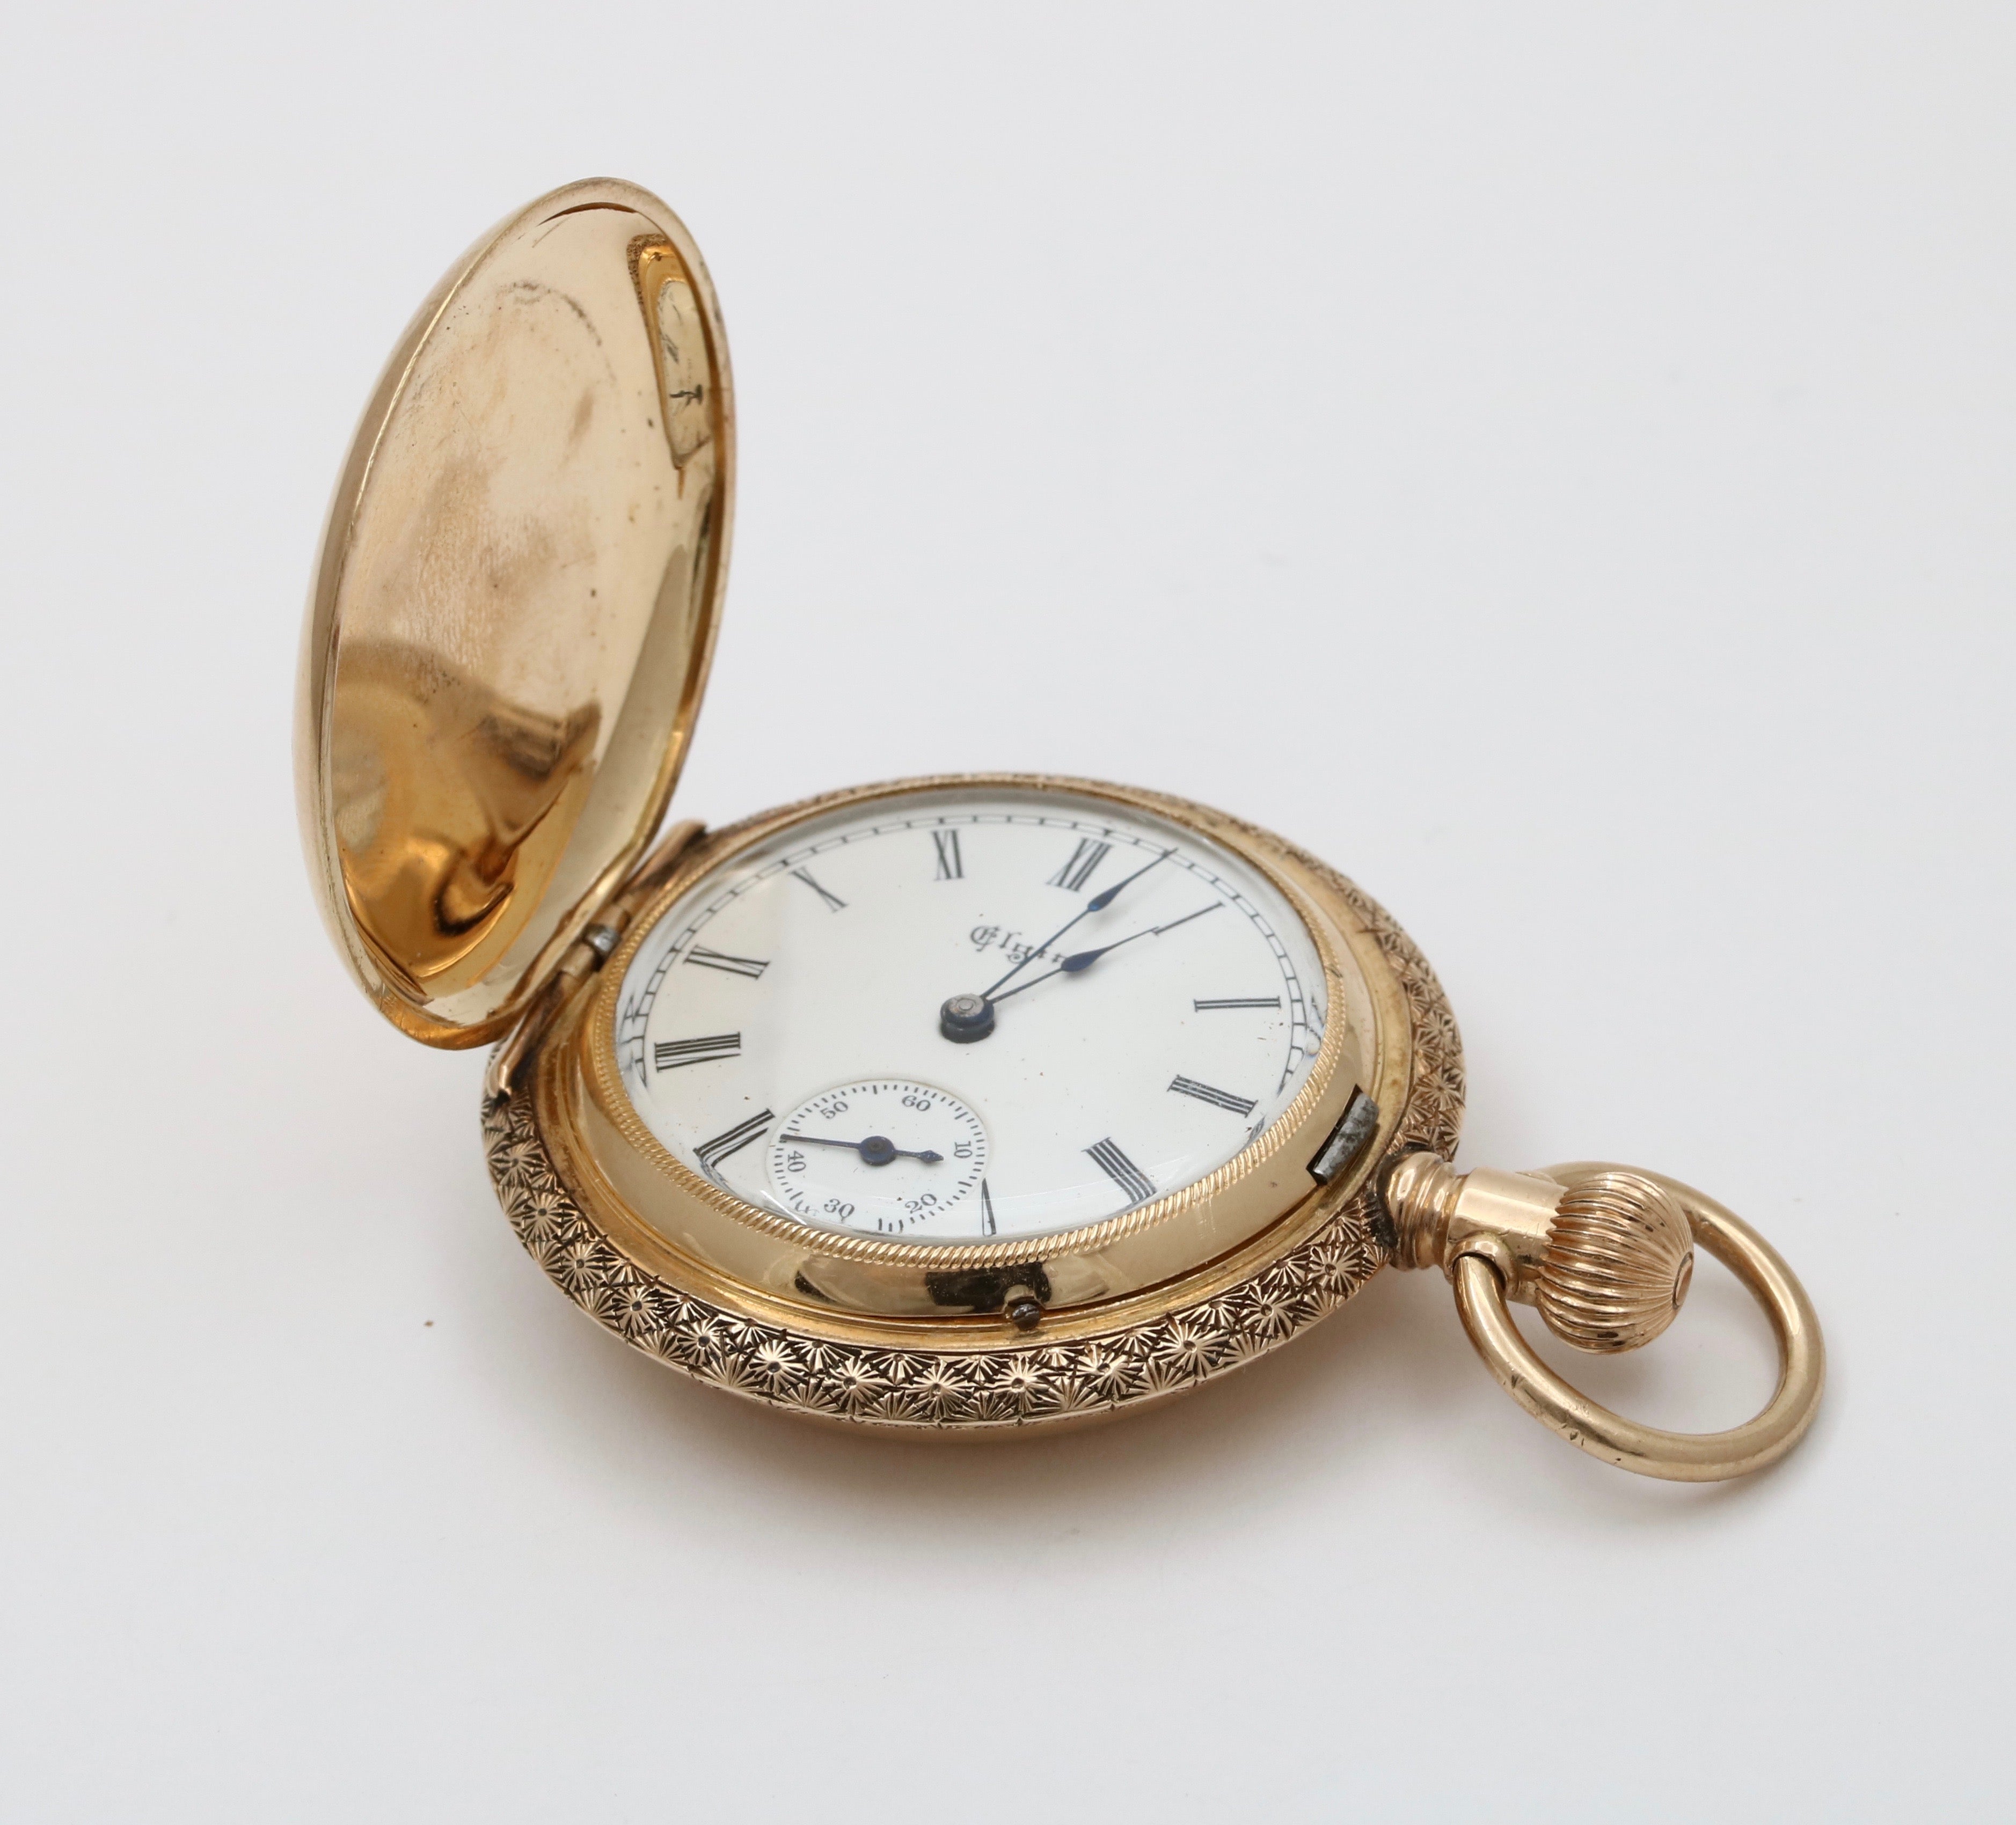 The Best Graduation Gift Is A Vintage Pocket Watch | The Strategist